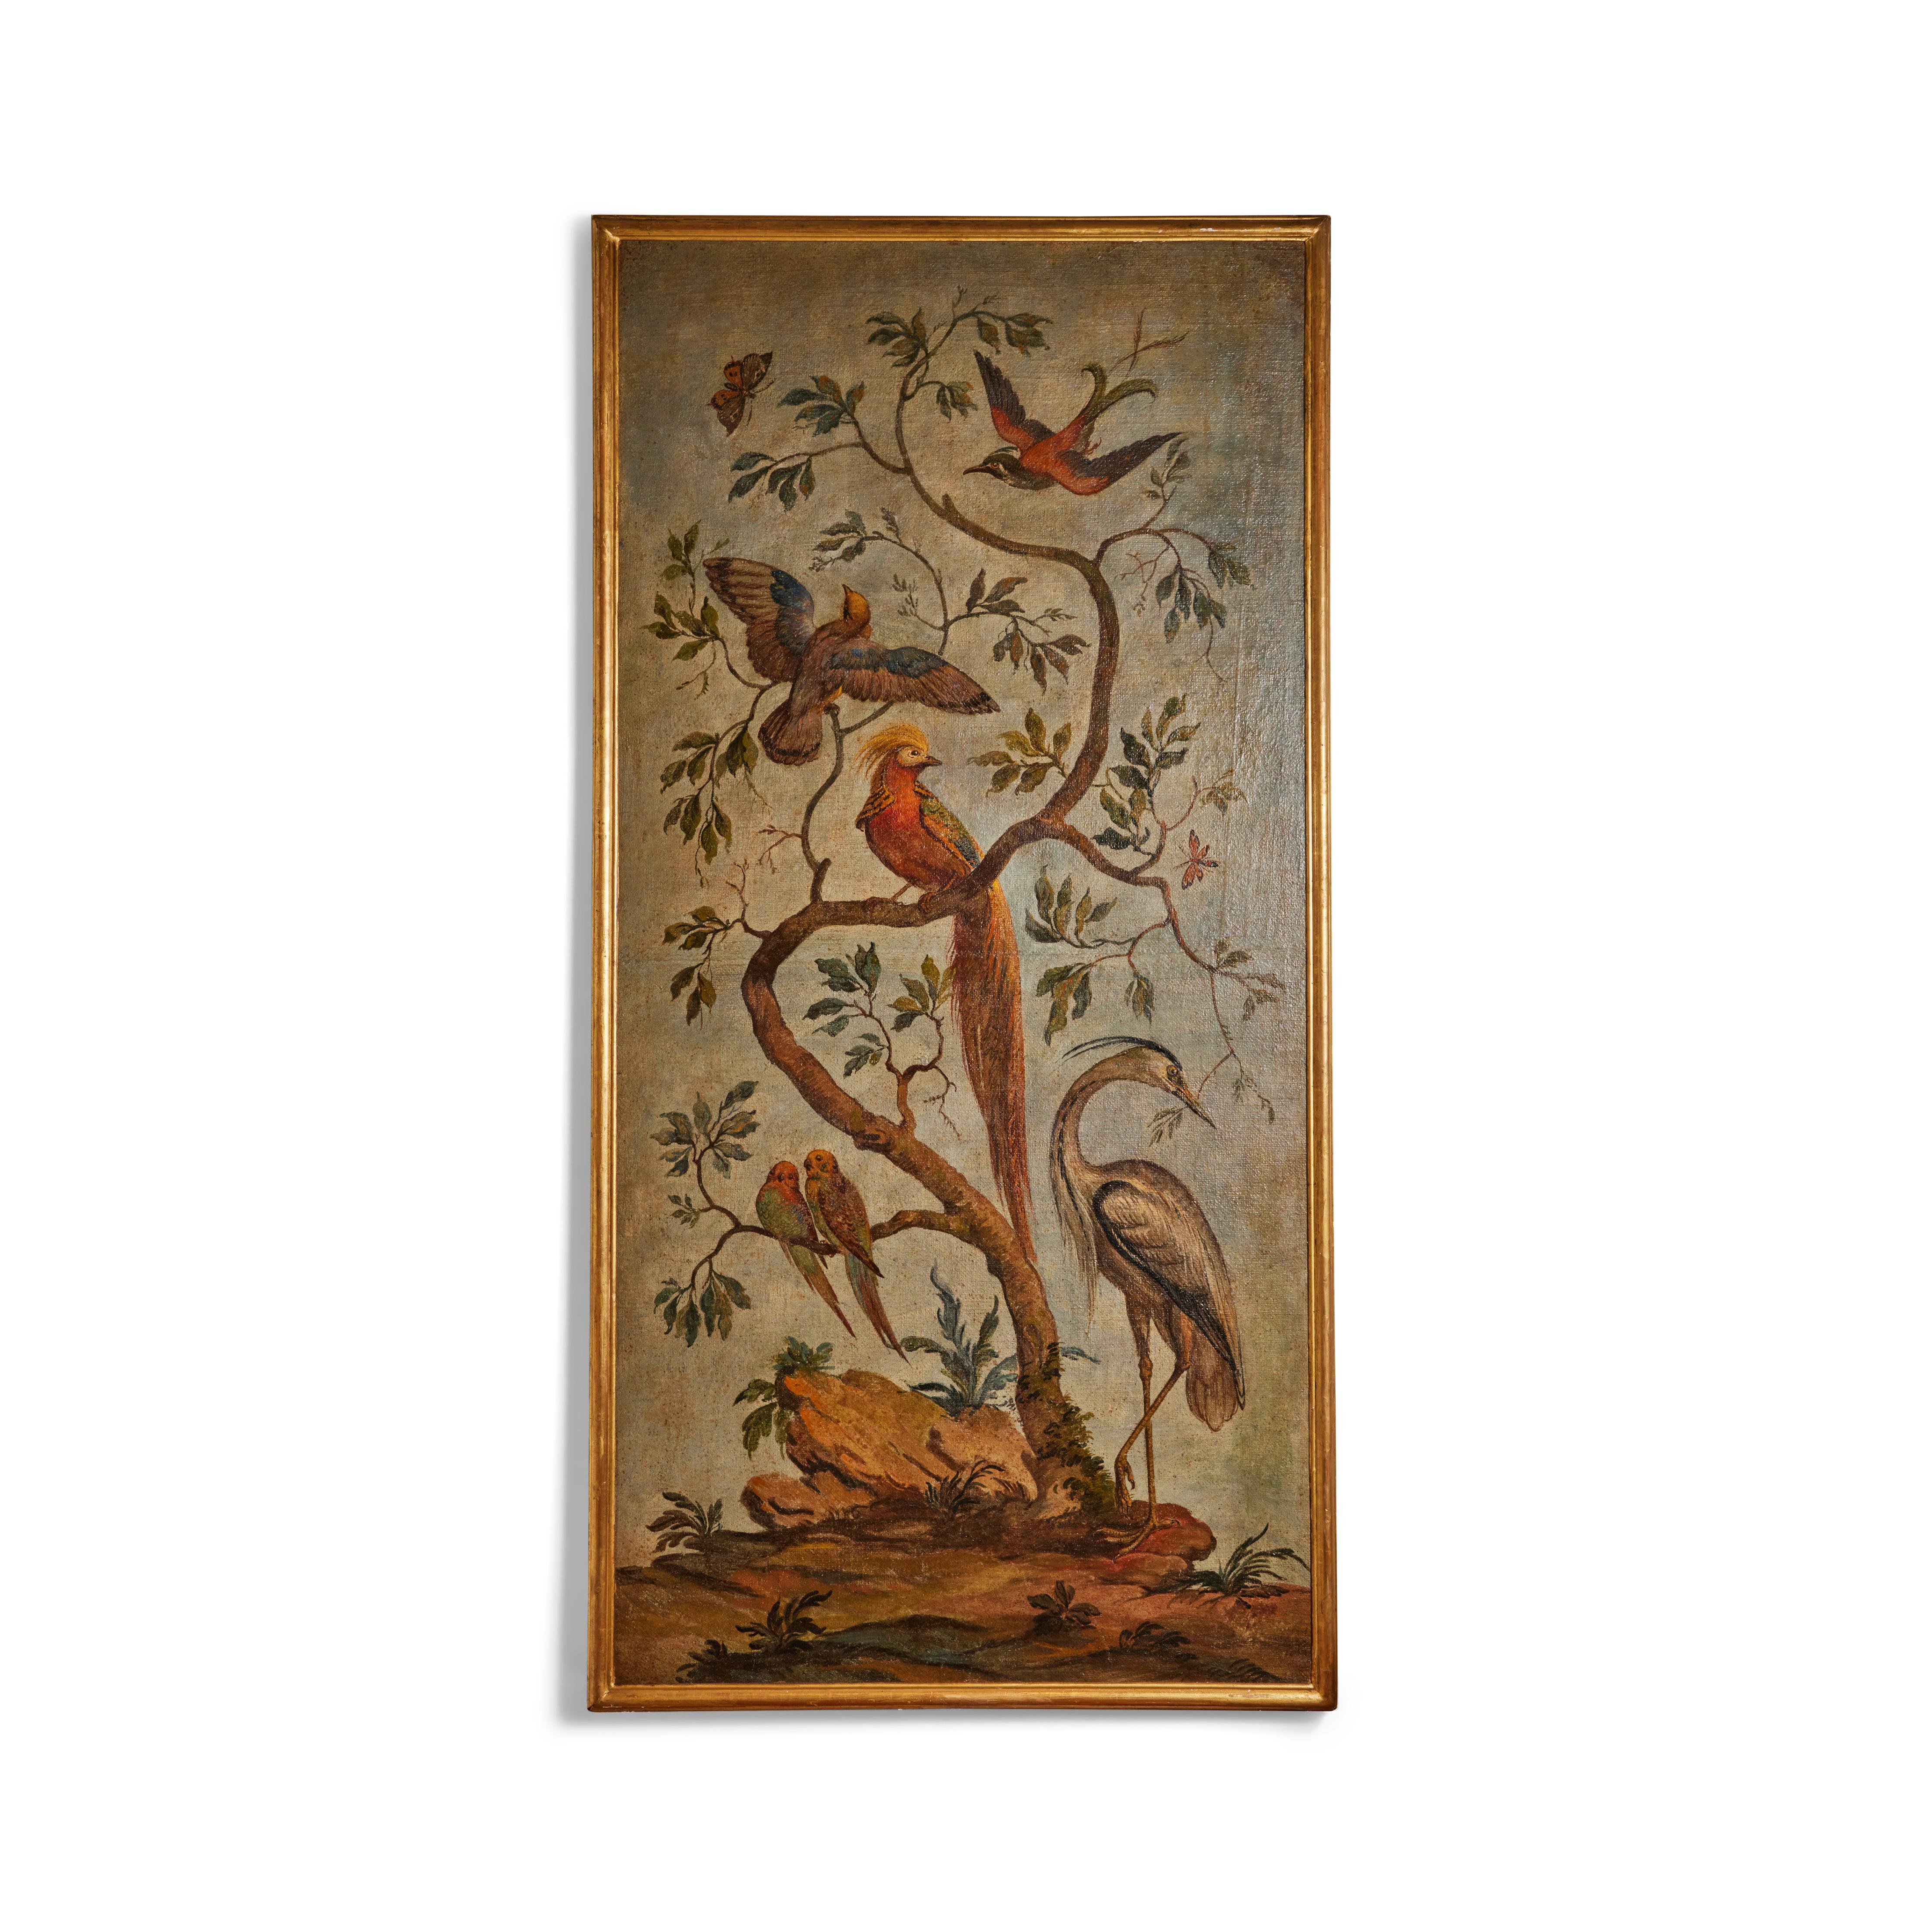 An elegant pair of large, vibrantly colored, 1780, Northern Italian, hand-painted, oil-on-canvas panels of a variety of birds gathered in the branches of sinuous, leafy trees. Each held in newer, giltwood frames.